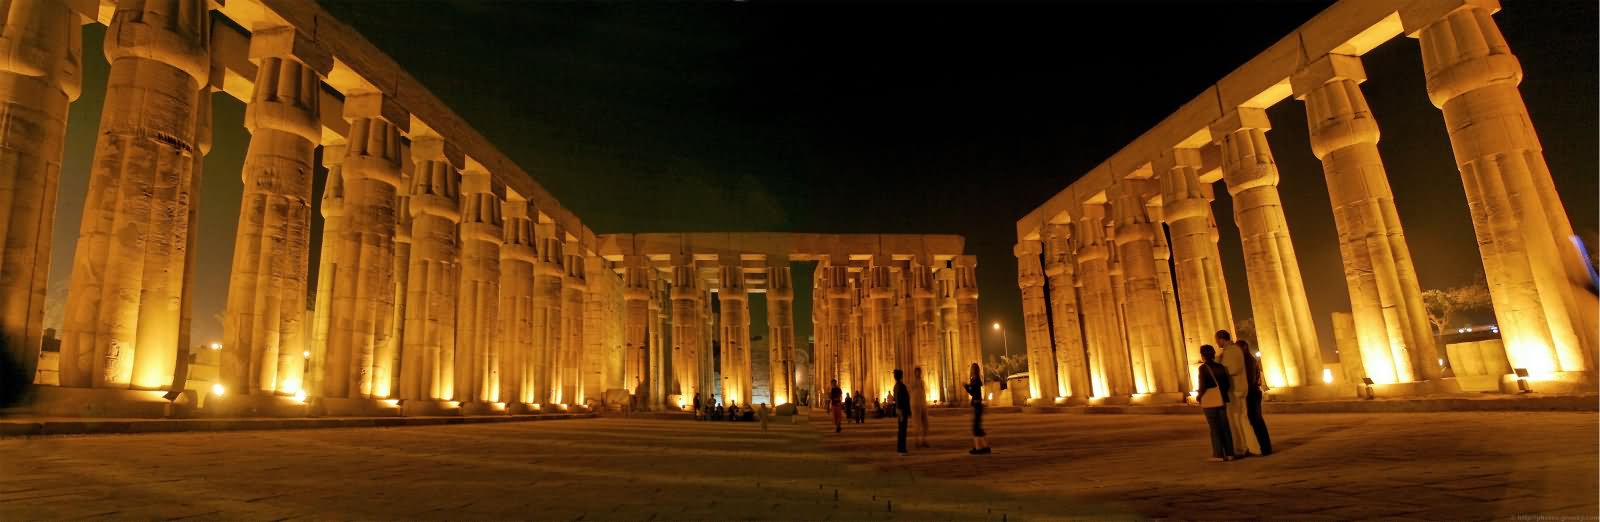 Panorama View Of Columns Inside The Luxor Temple At Night